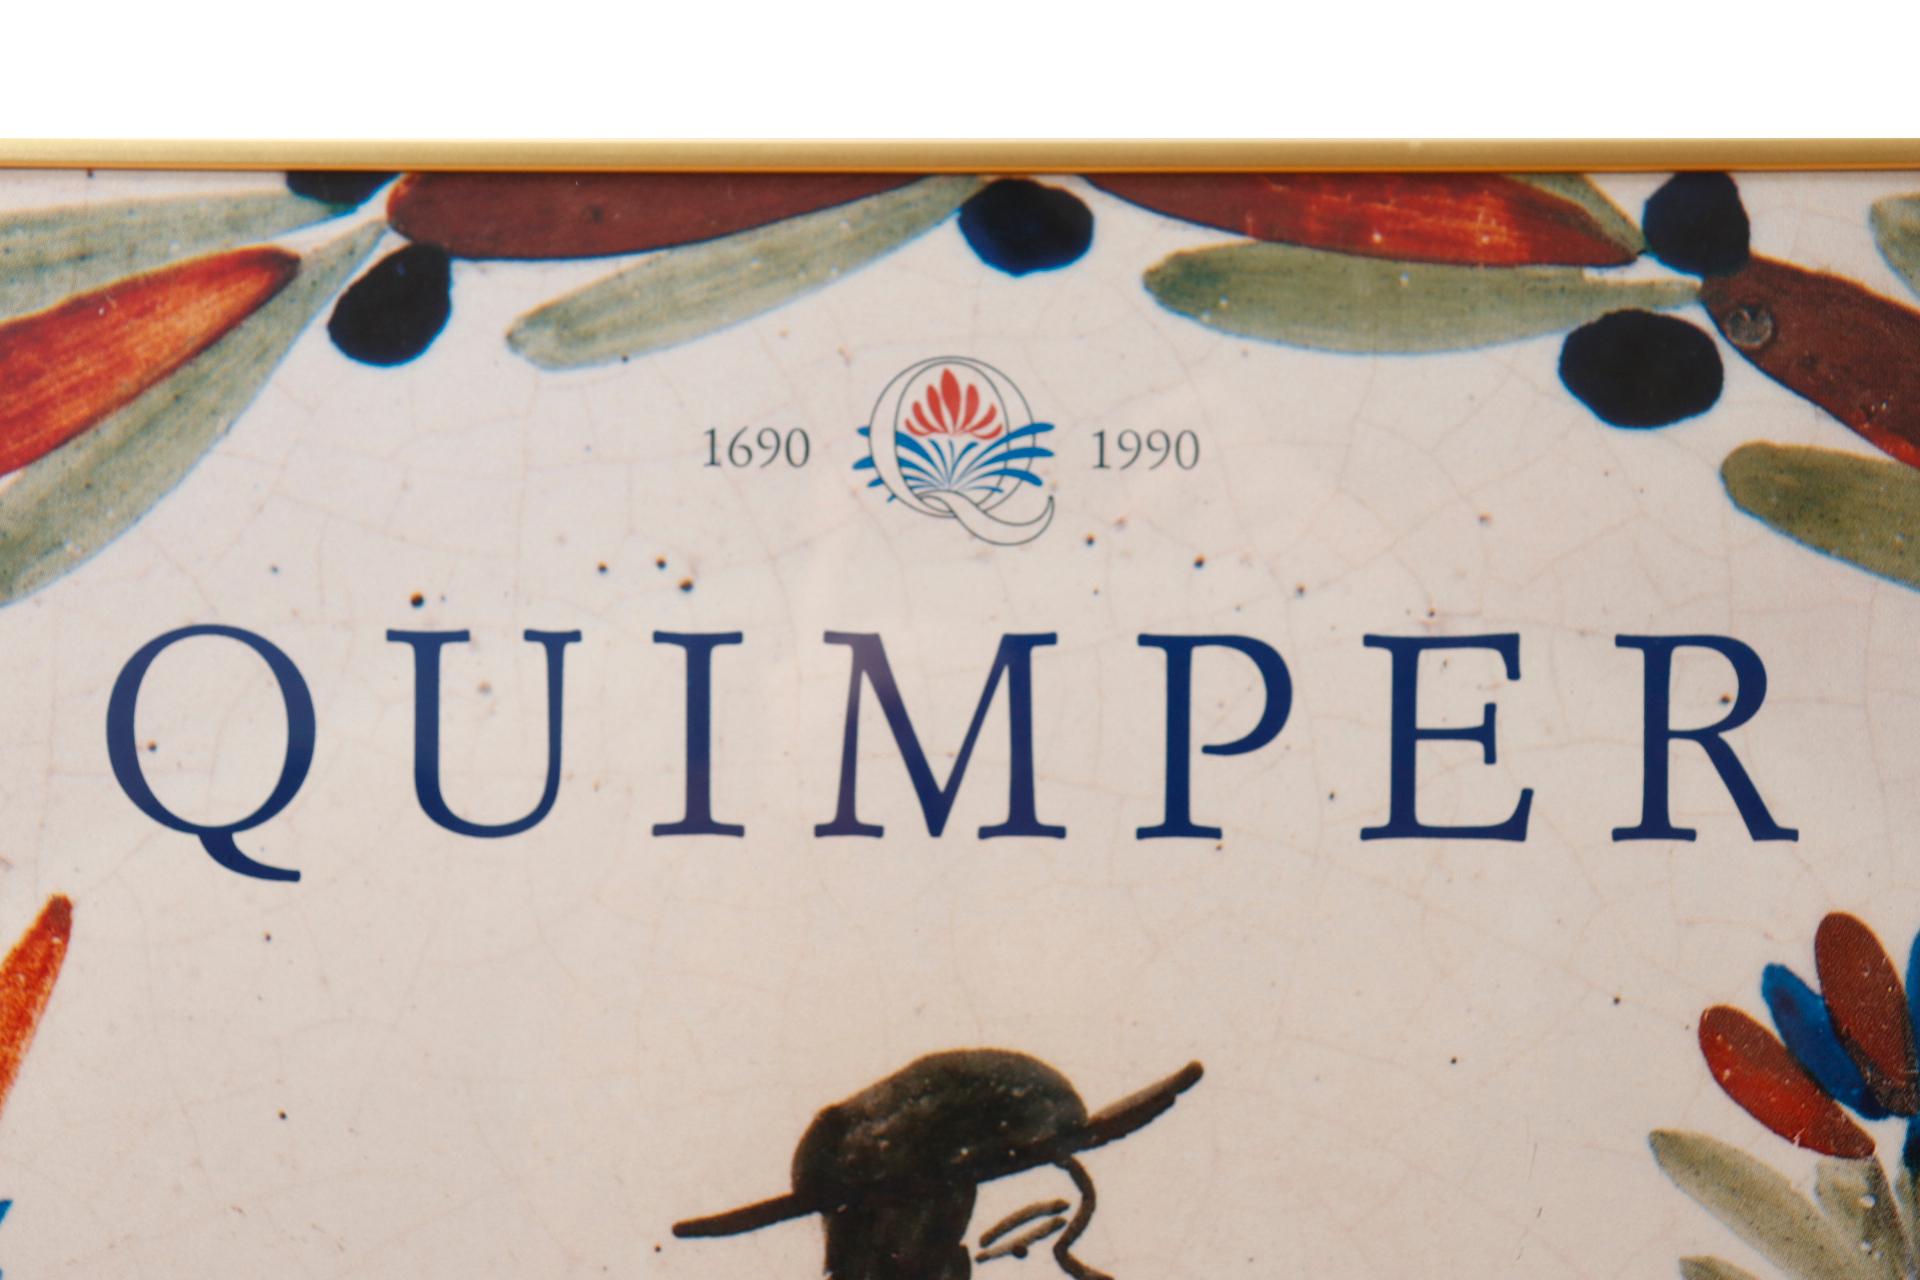 A framed lithograph poster promoting an exhibition at the Musée des Beaux-Arts celebrating three centuries of Quimper Faïence, May through September in 1990. The poster depicts a “Petit Breton” peasant framed with blue, red and green leaves in a